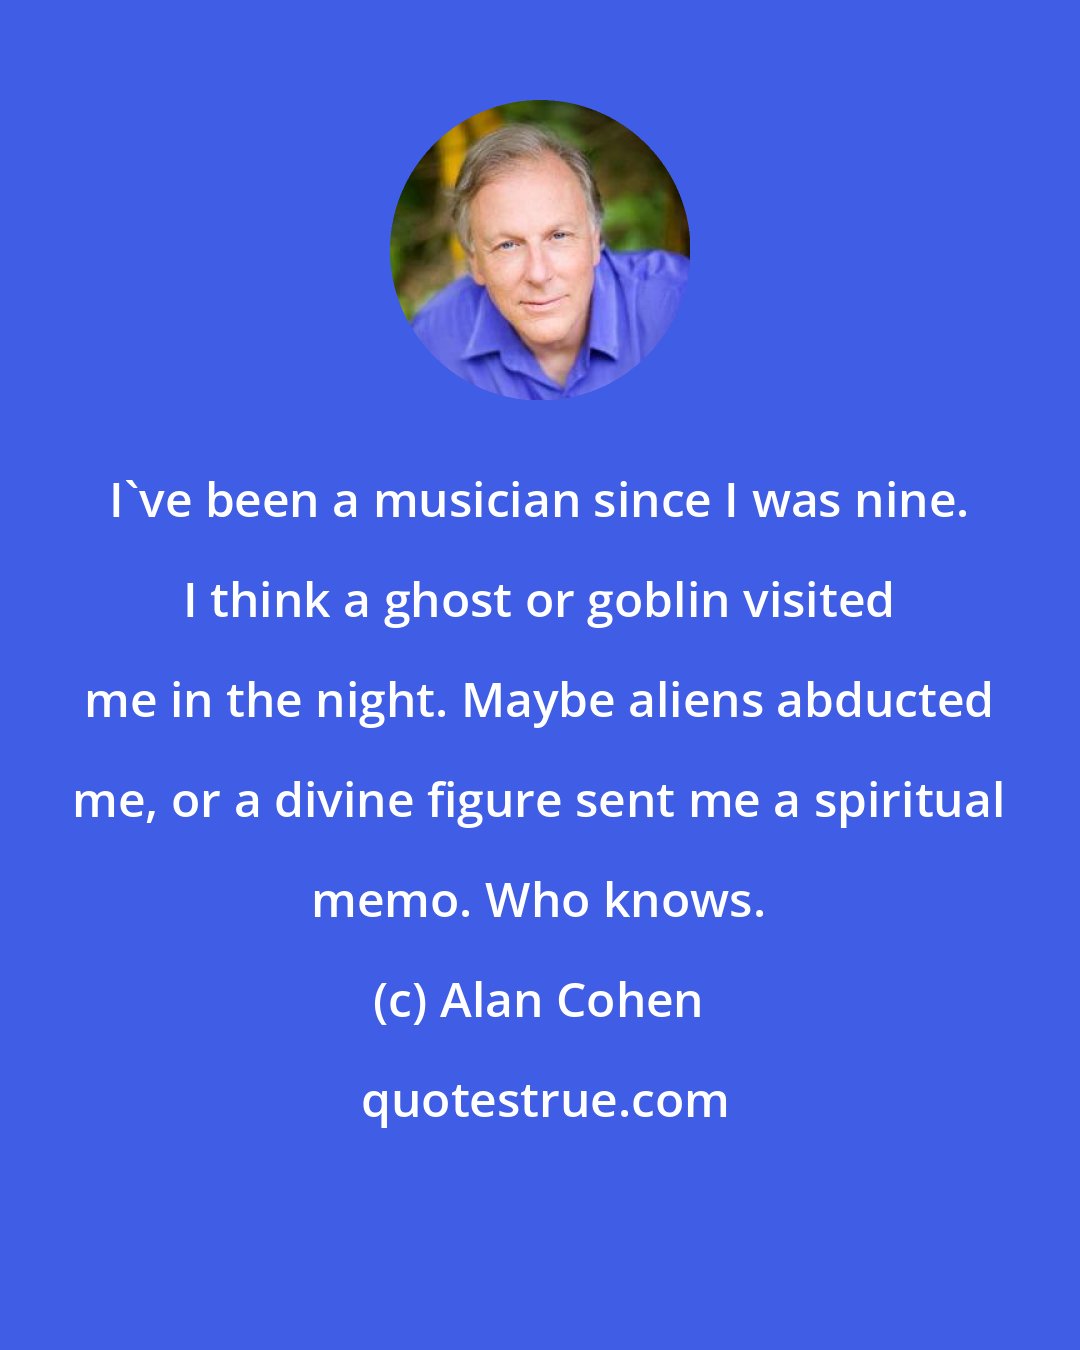 Alan Cohen: I've been a musician since I was nine. I think a ghost or goblin visited me in the night. Maybe aliens abducted me, or a divine figure sent me a spiritual memo. Who knows.